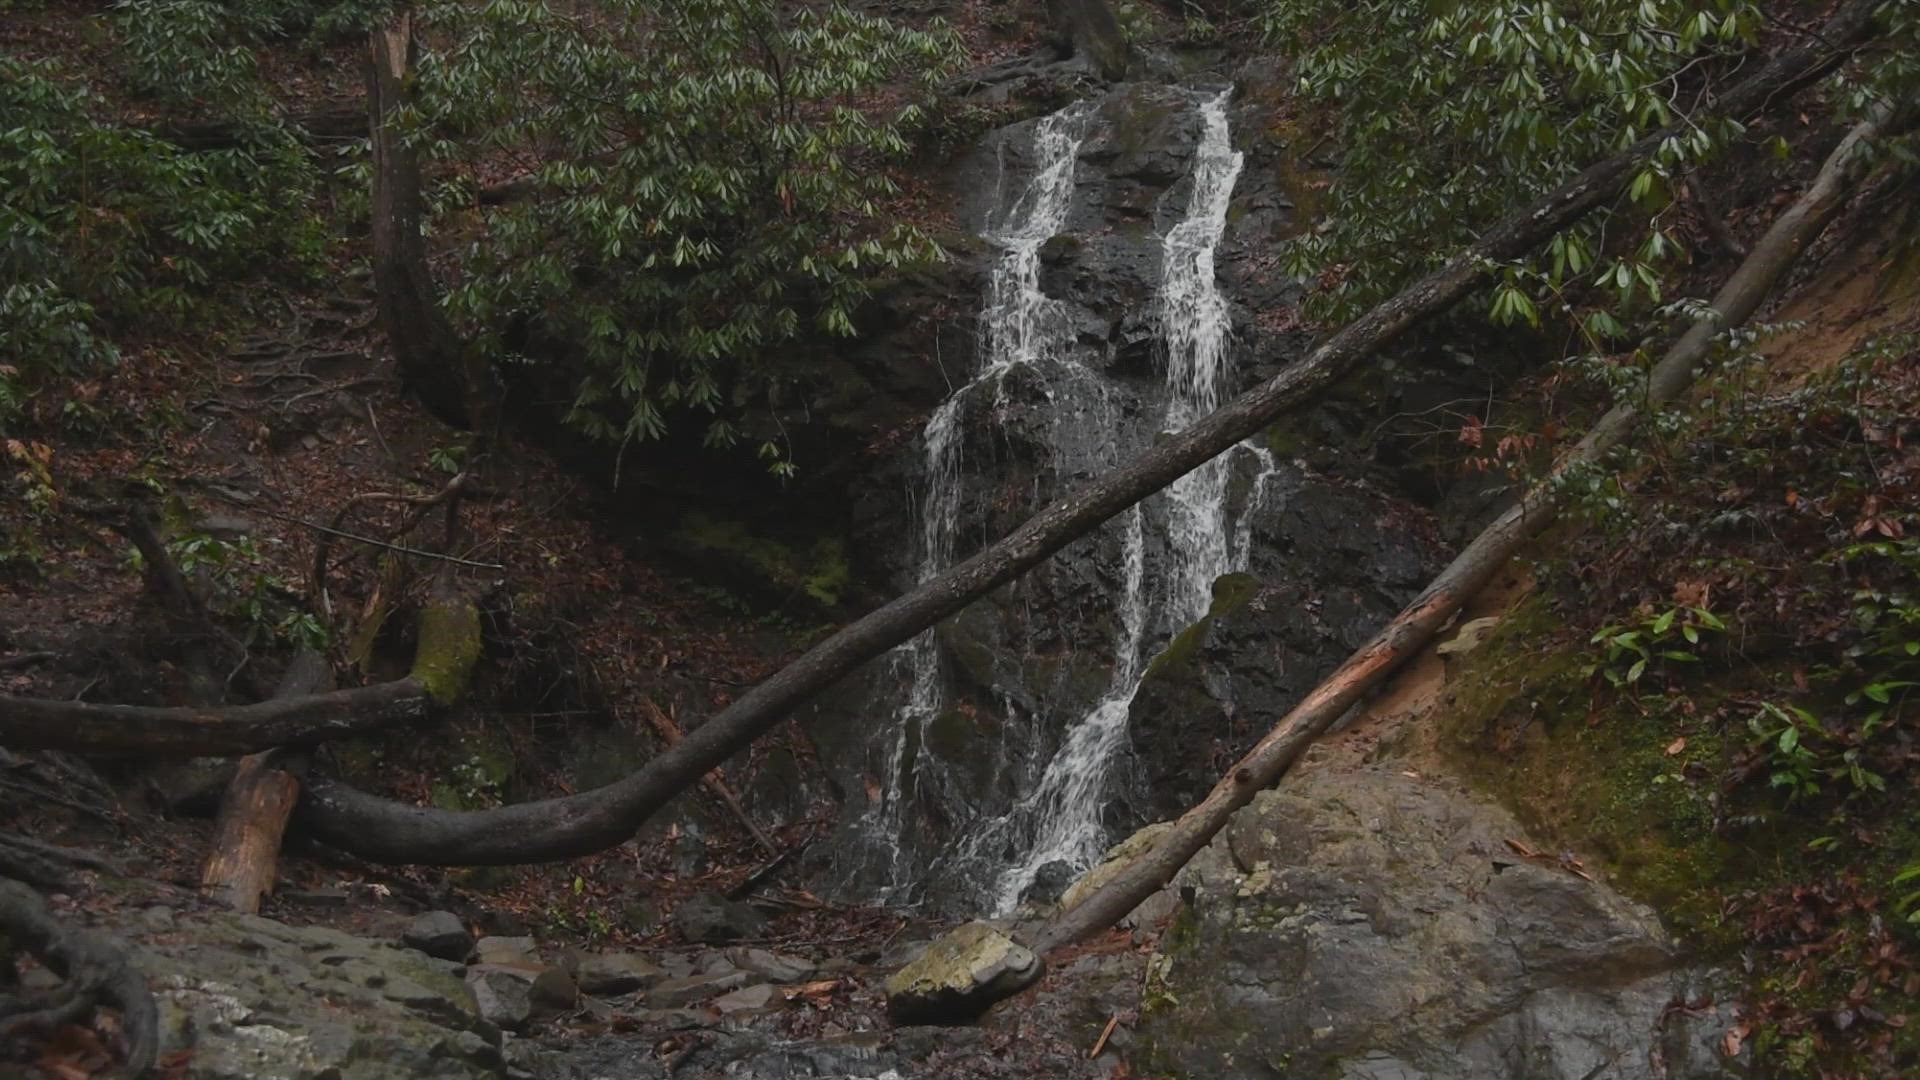 At just over 1 mile round trip on a well-marked path, the trip to Cataract Falls is considered an easy hike on the Cove Mountain Trail in the Great Smoky Mountains.